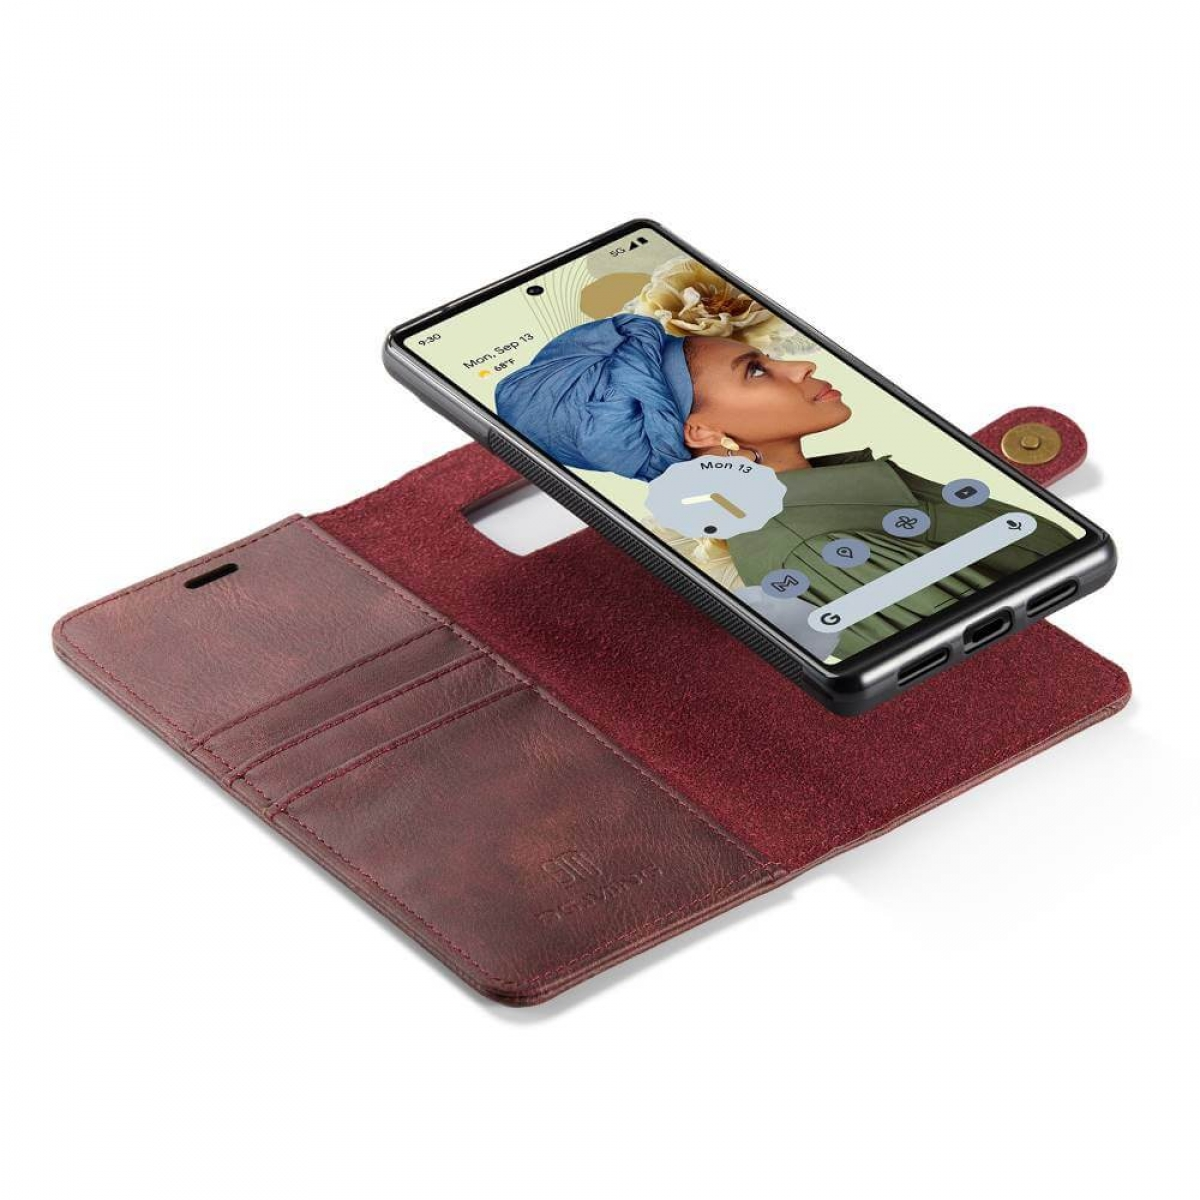 DG Bookcover, Rot Google, 6 Pixel MING Pro, 2in1,